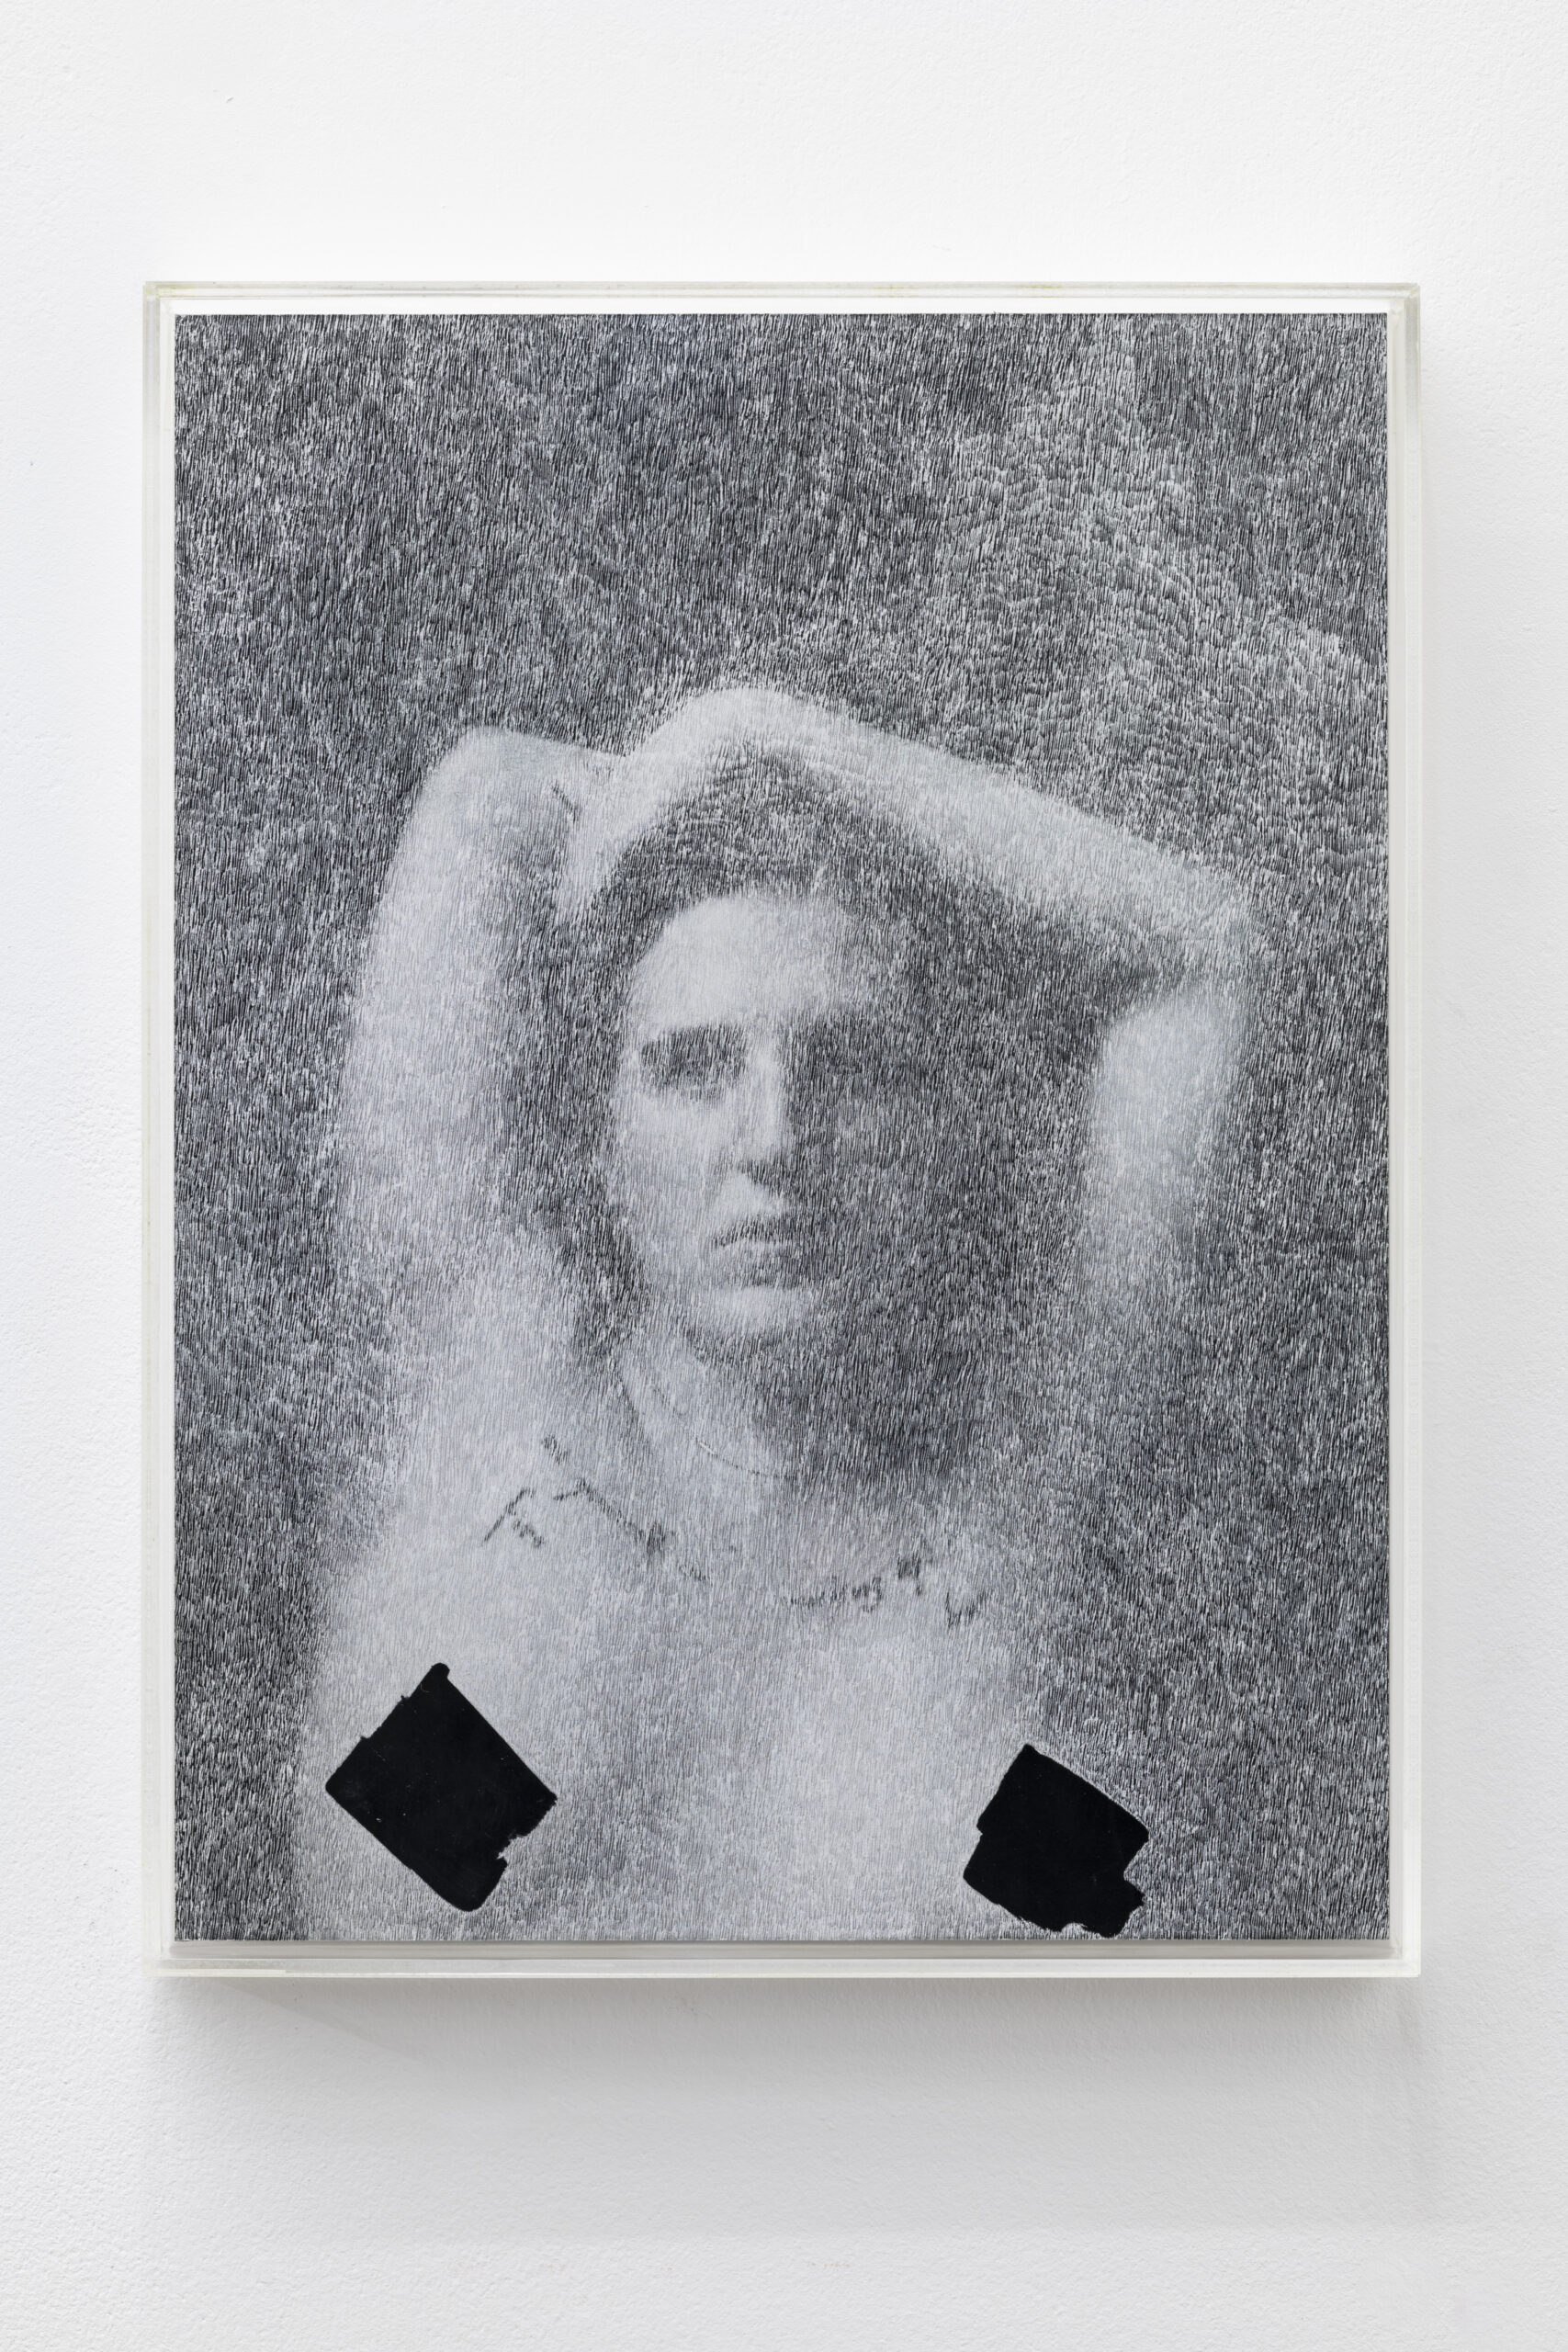 William Mackrell: Cover Up (Set yourself on fire) 2020 Etching on magazine print mounted on aluminium Mounted in UV acrylic case 30 cm x 22.5 cm